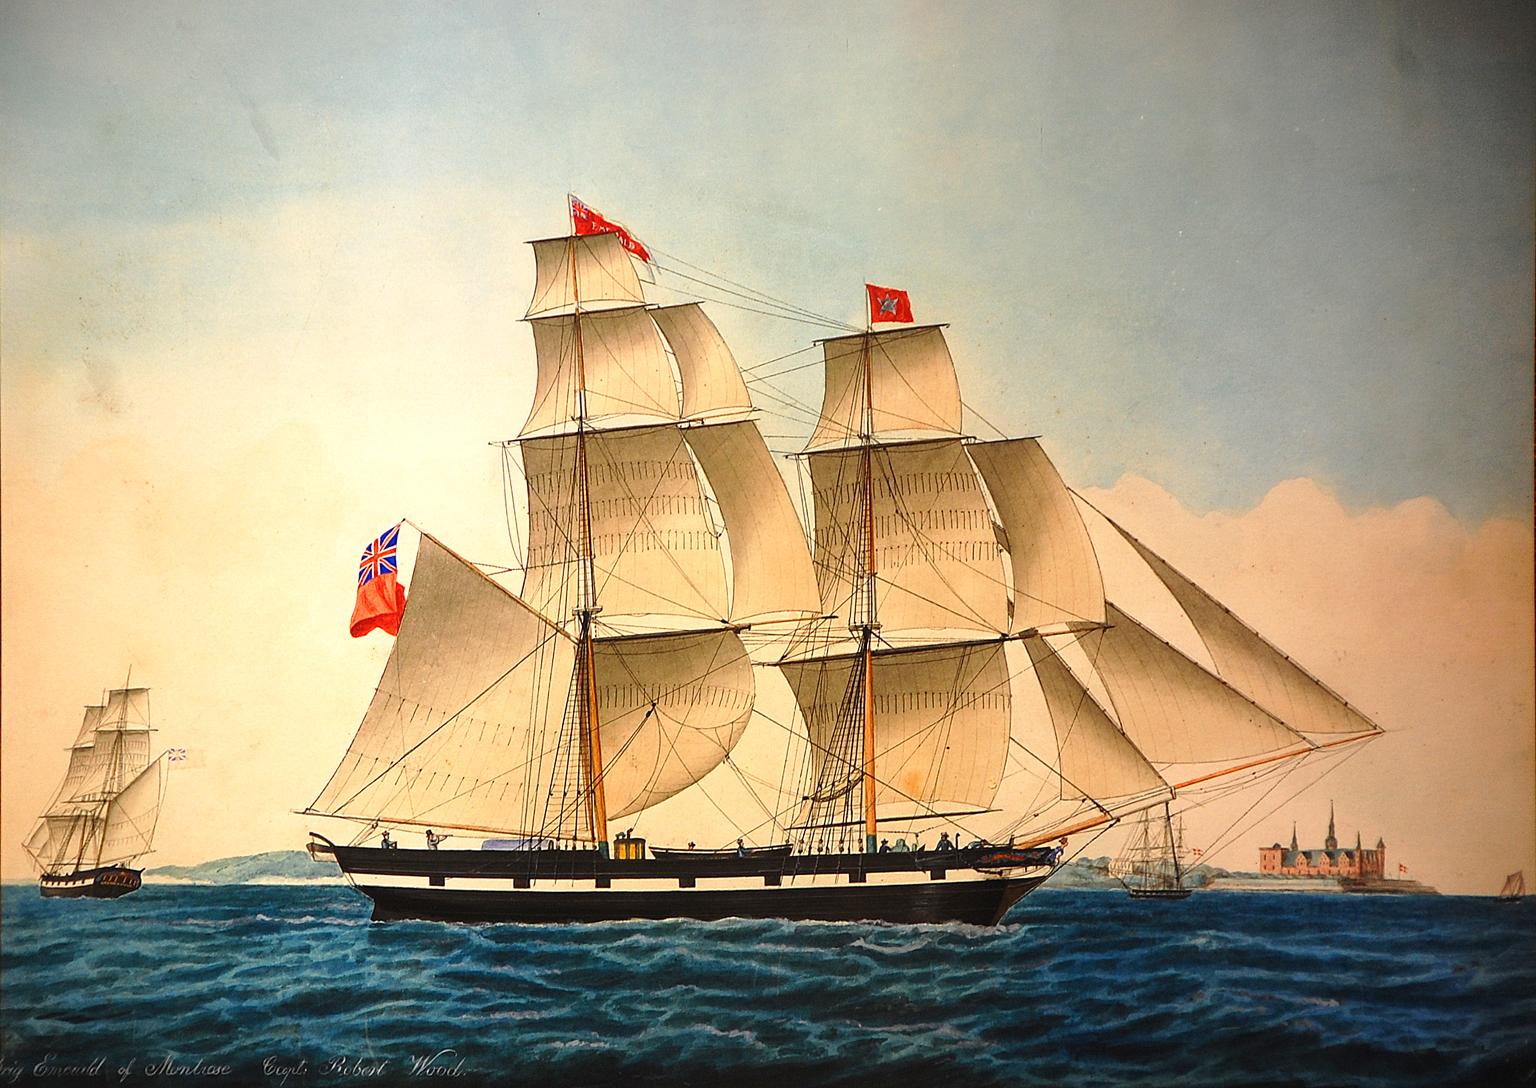 Danish original 19th century watercolor and ink portrait of the two masted brig 